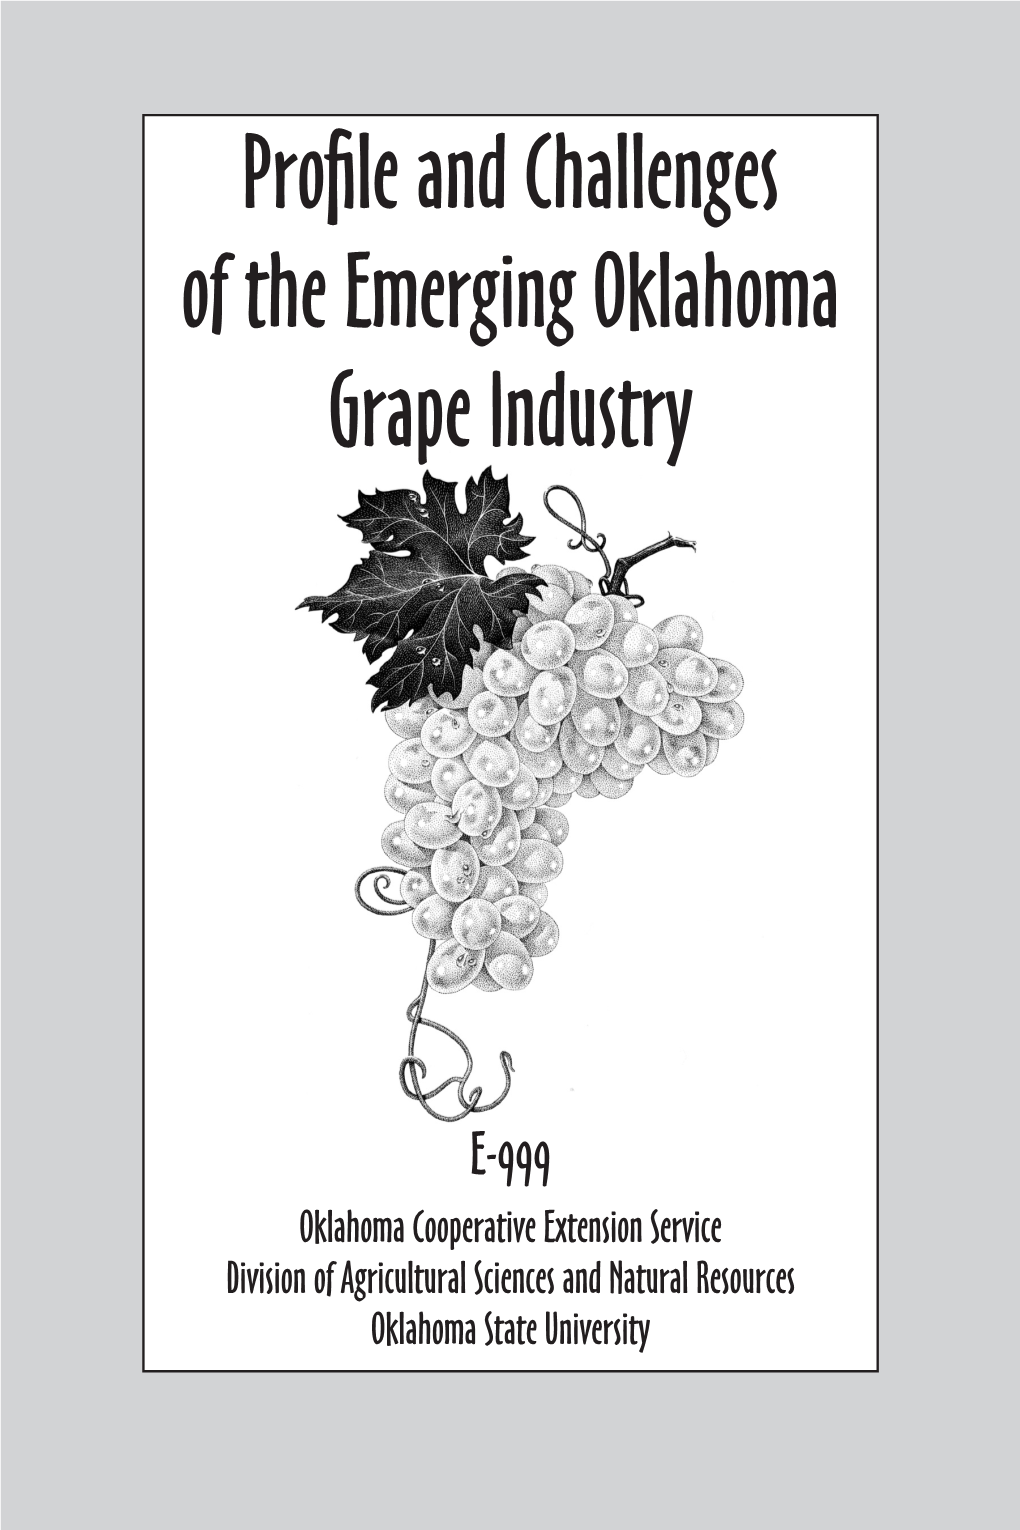 Profile and Challenges of the Emerging Oklahoma Grape Industry